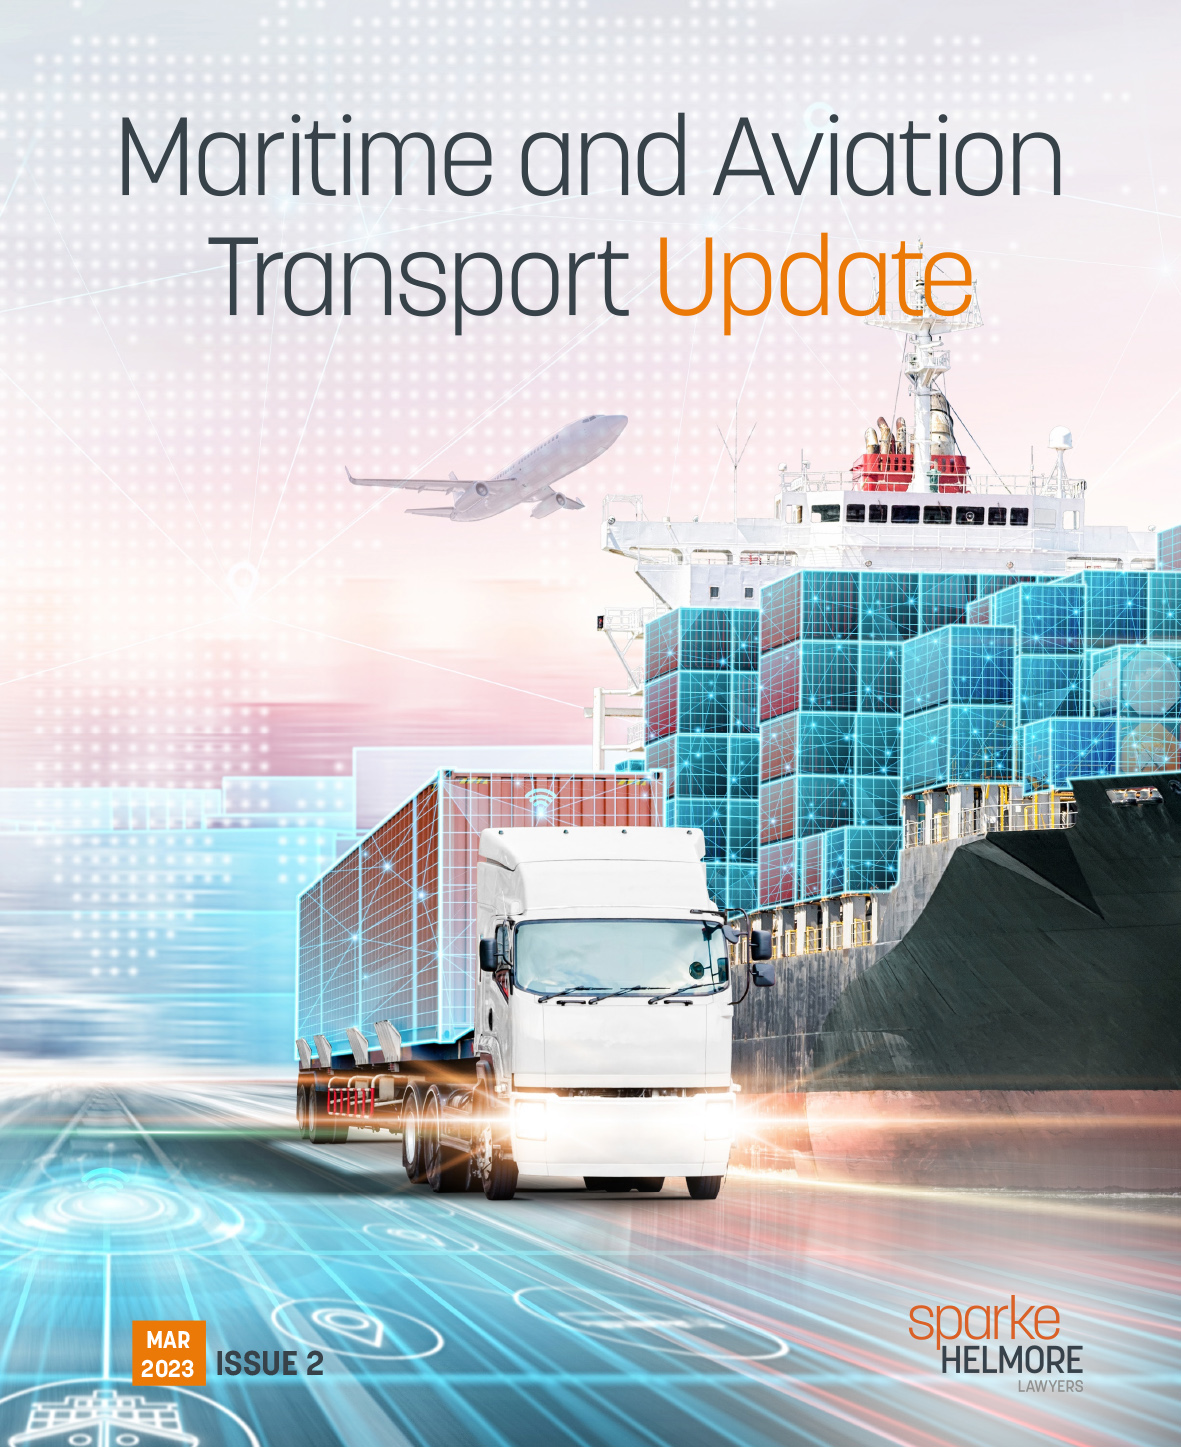 Maritime and Aviation Transport Update issue 2 portrait